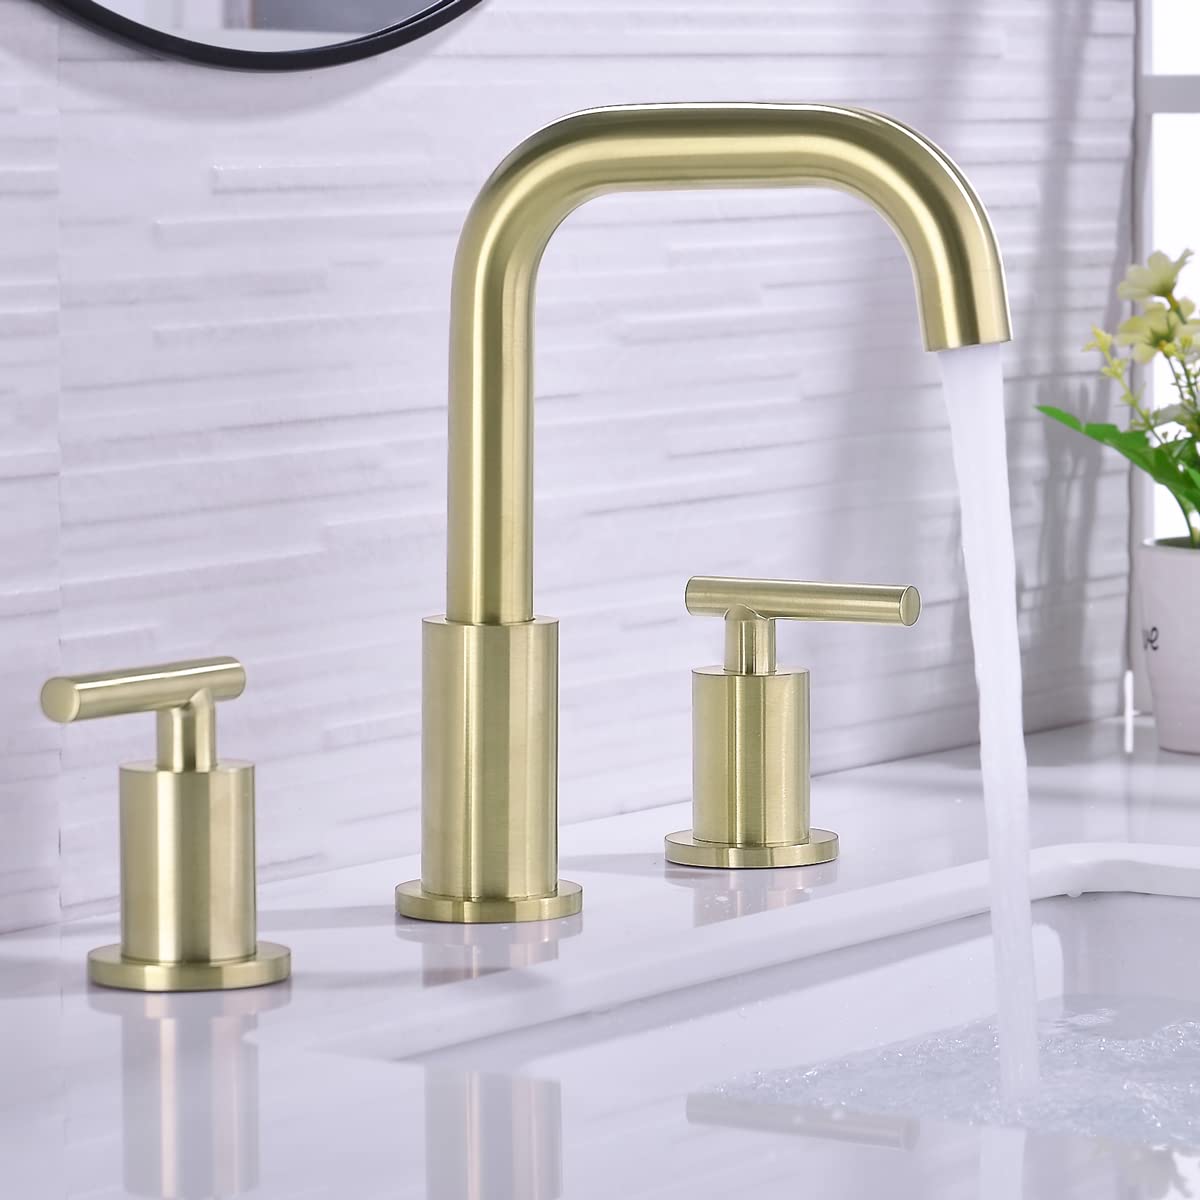 TRUSTMI Bathroom Faucet 2 Handle 8 Inch Brass Sink Faucet 3 Hole Widespread with 360 Degree Swivel Spout, cUPC Water Supply Lines and Overflow Pop Up Drain Included, Brushed Gold